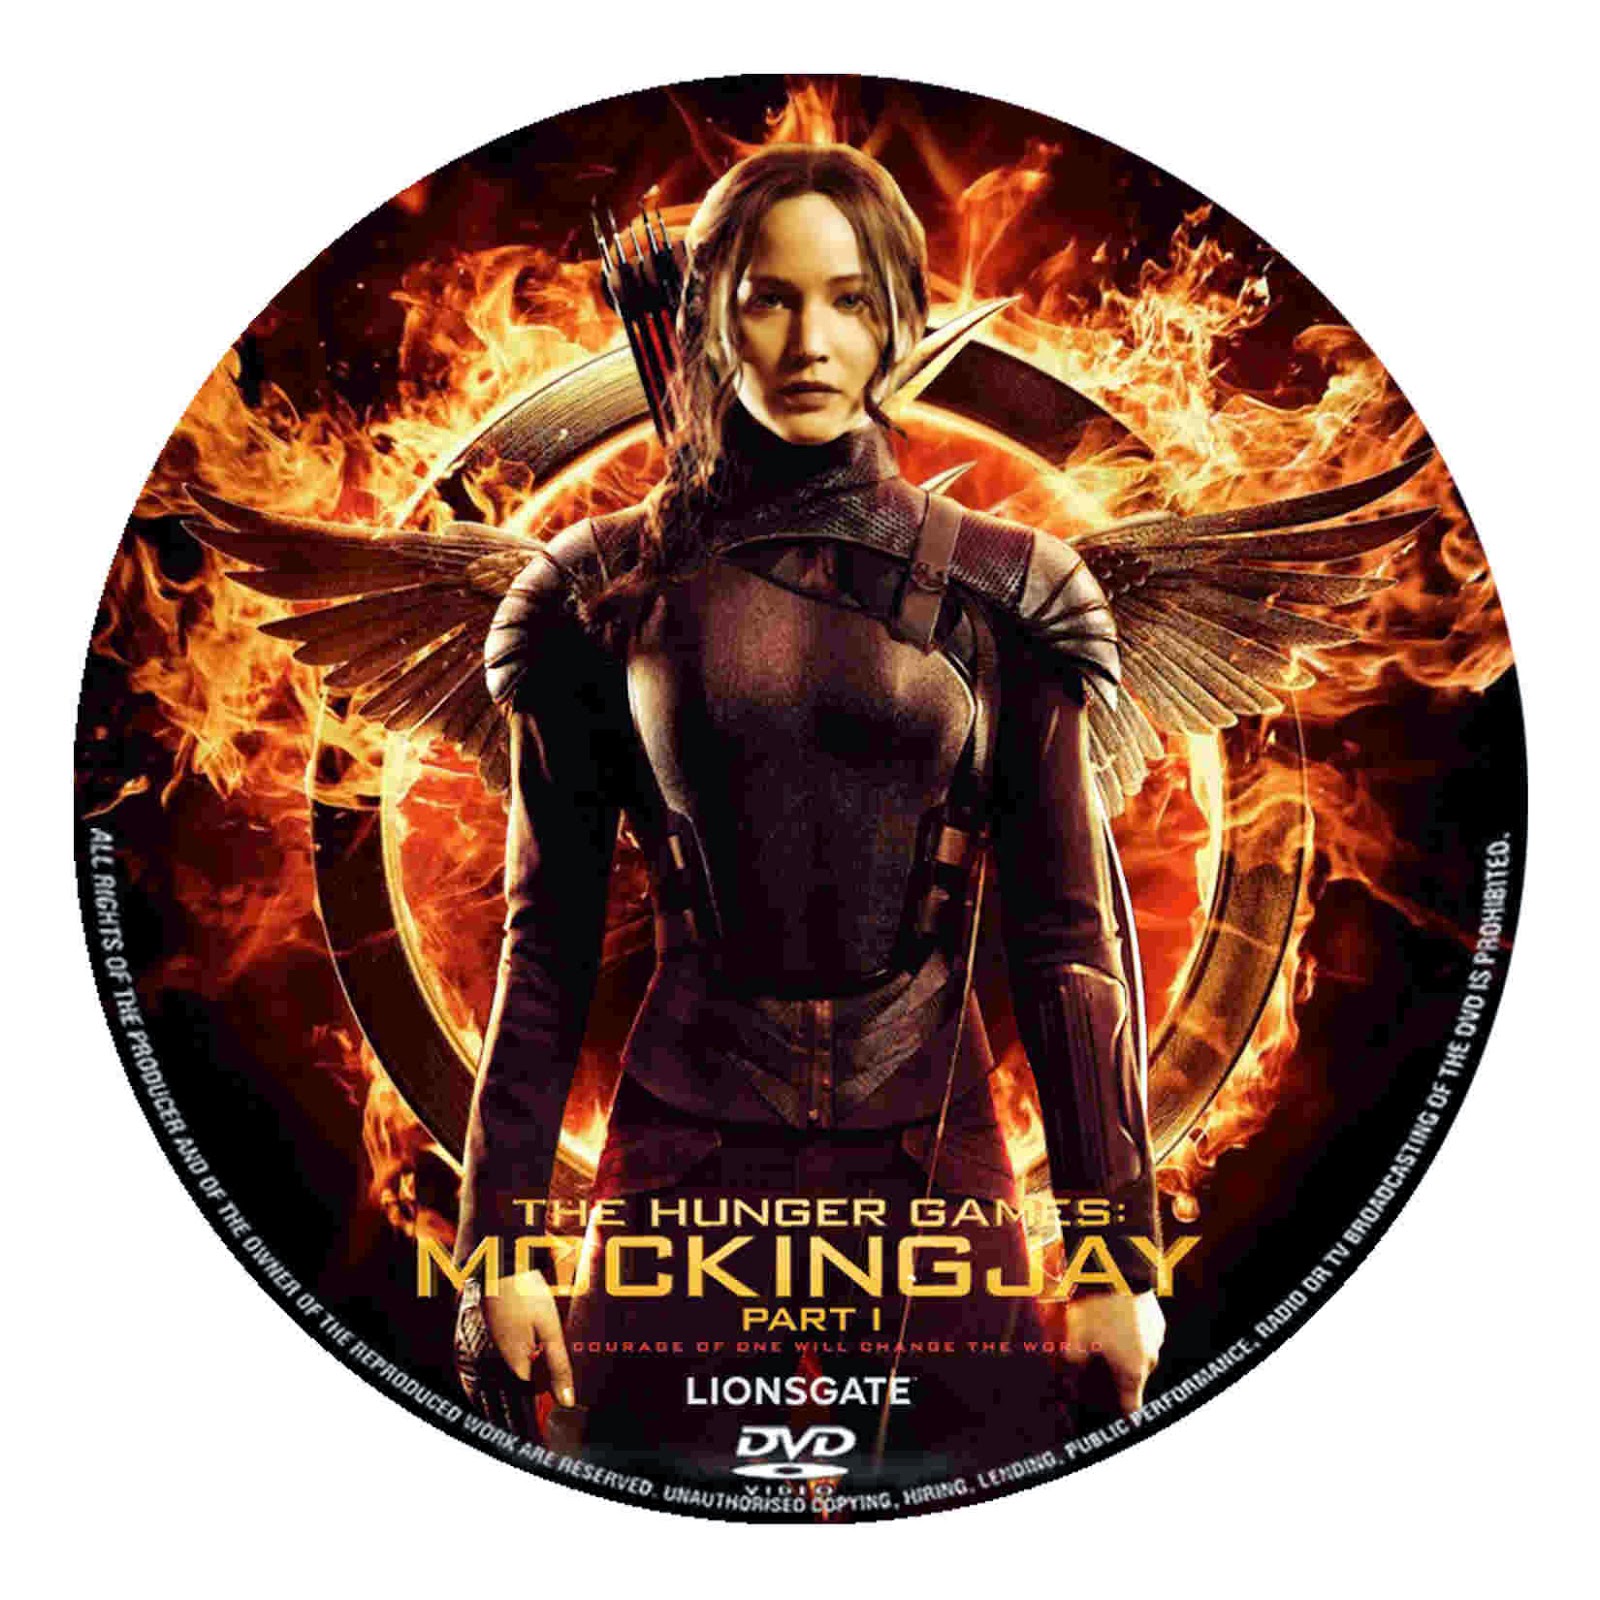  The Hunger Games: Mockingjay Part 1 (2014) - DVD Movie